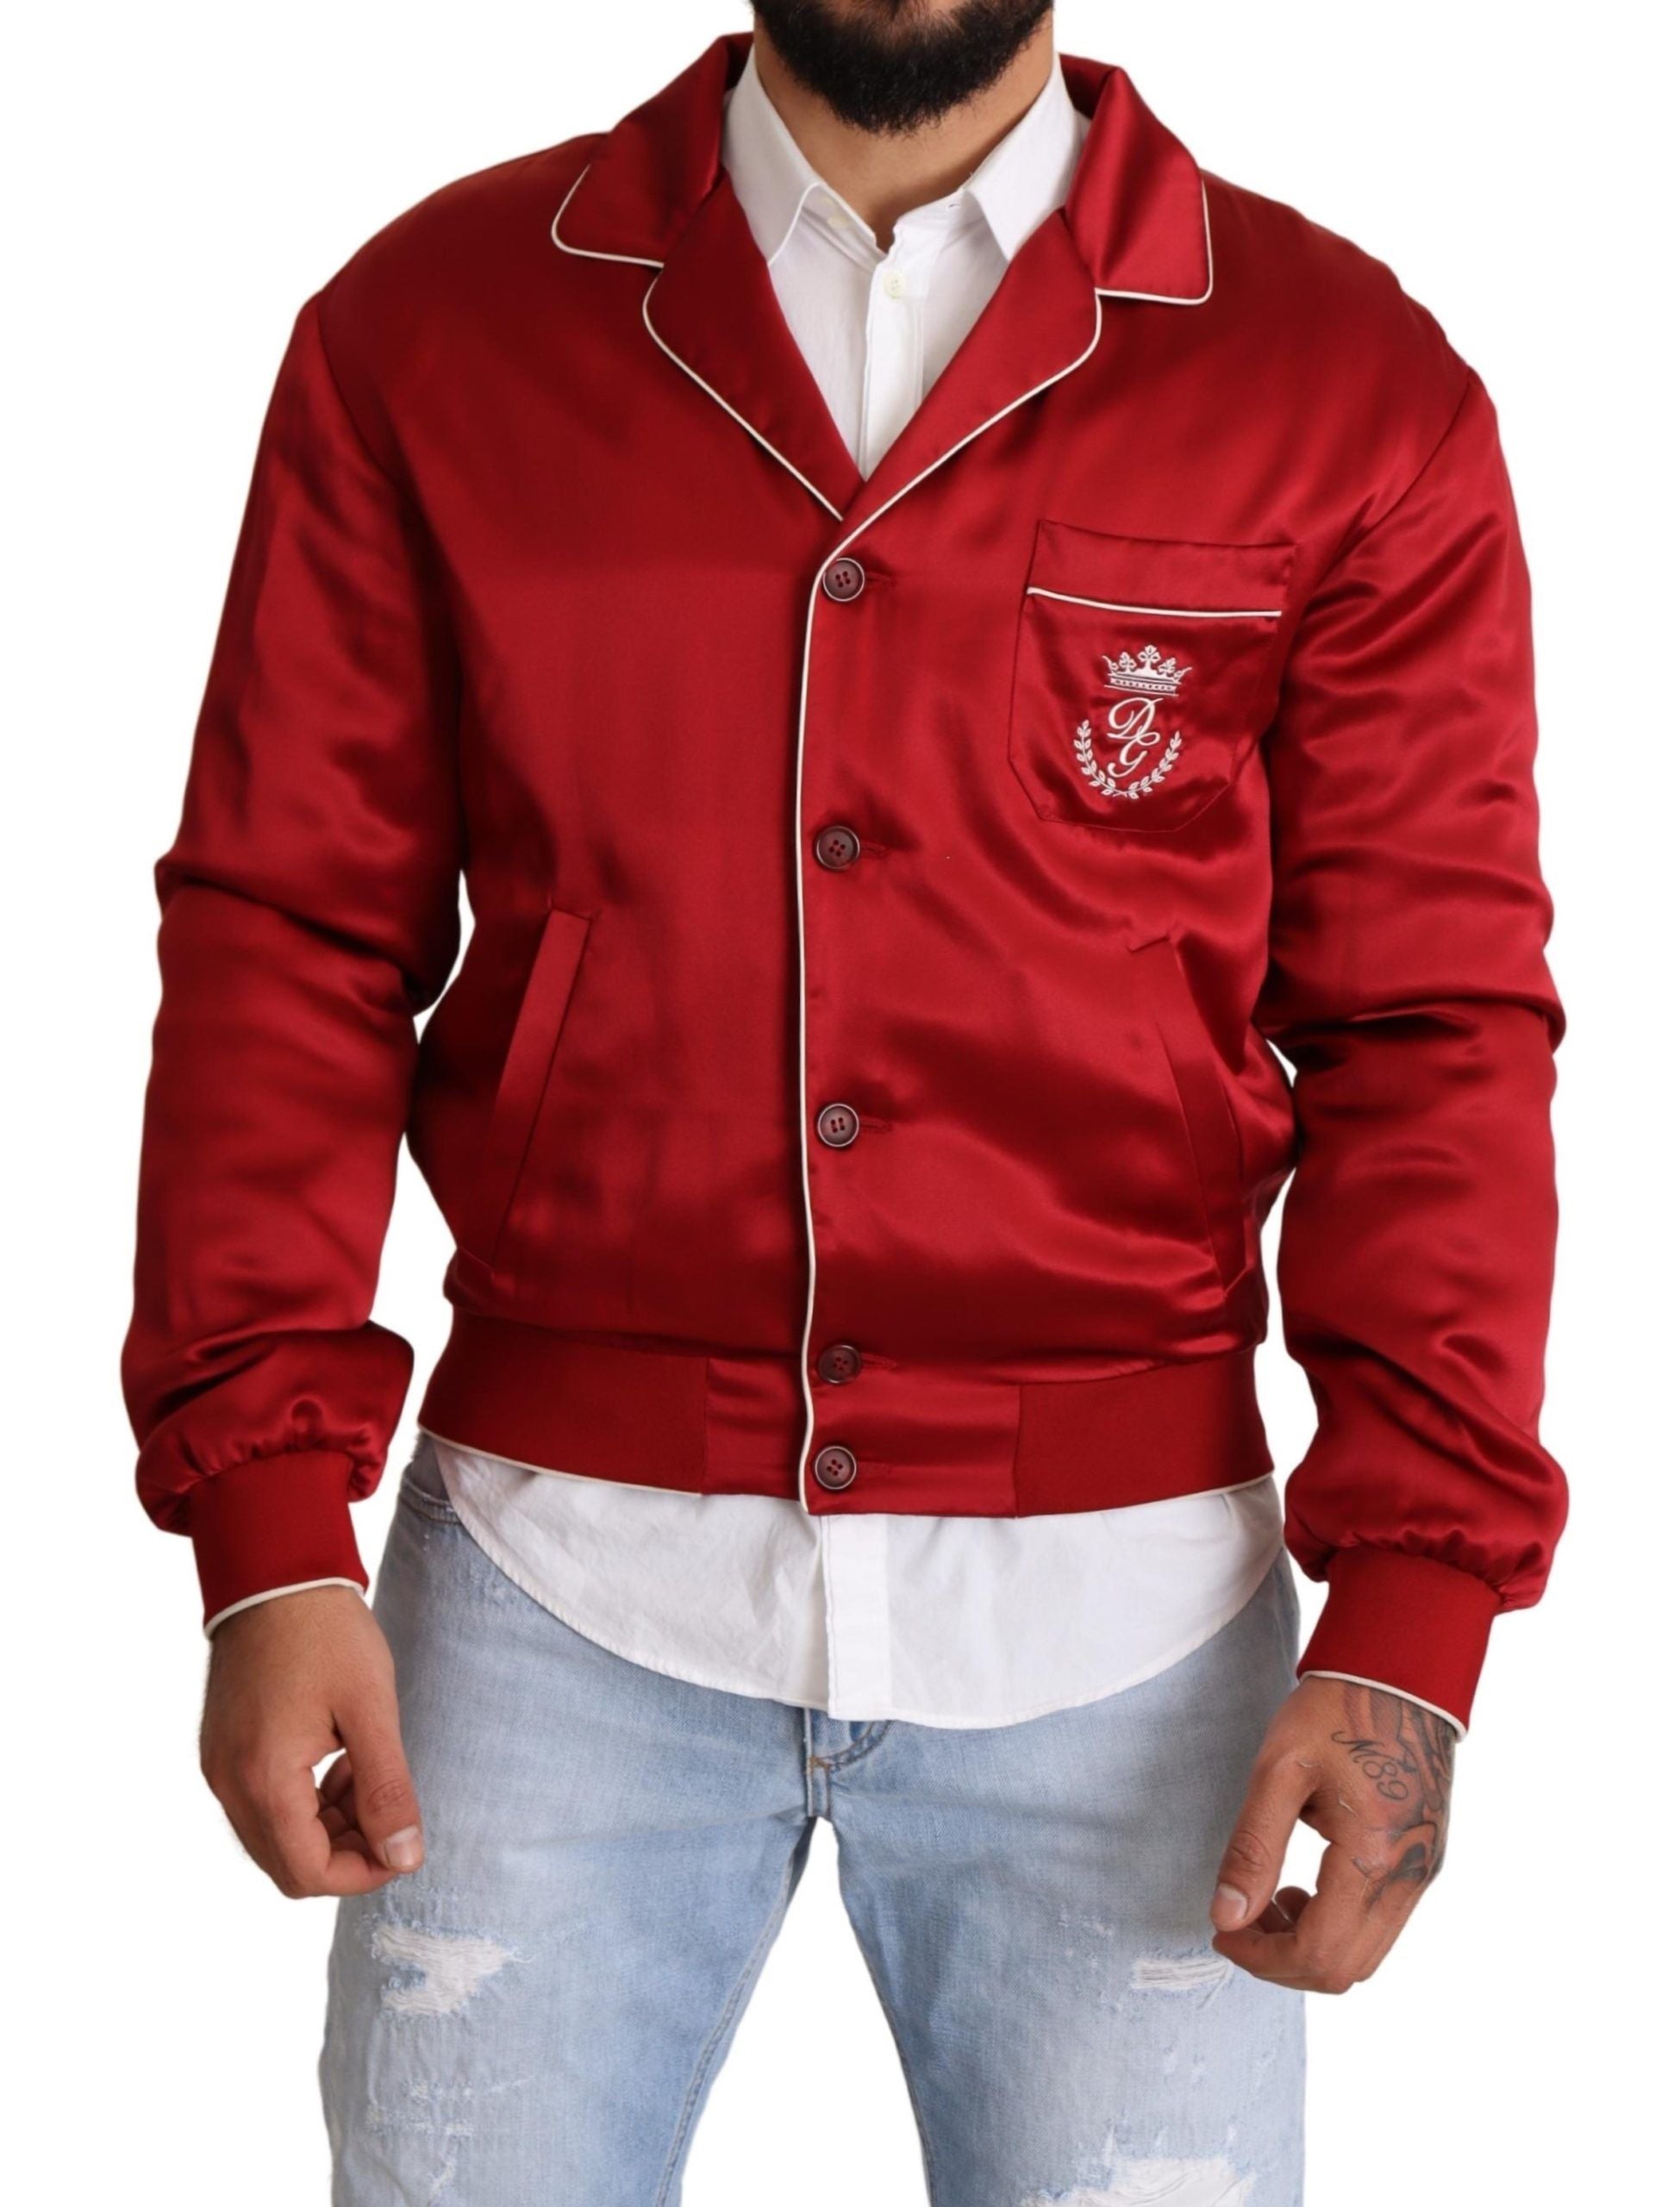 Sumptuous Silk Red Bomber Jacket